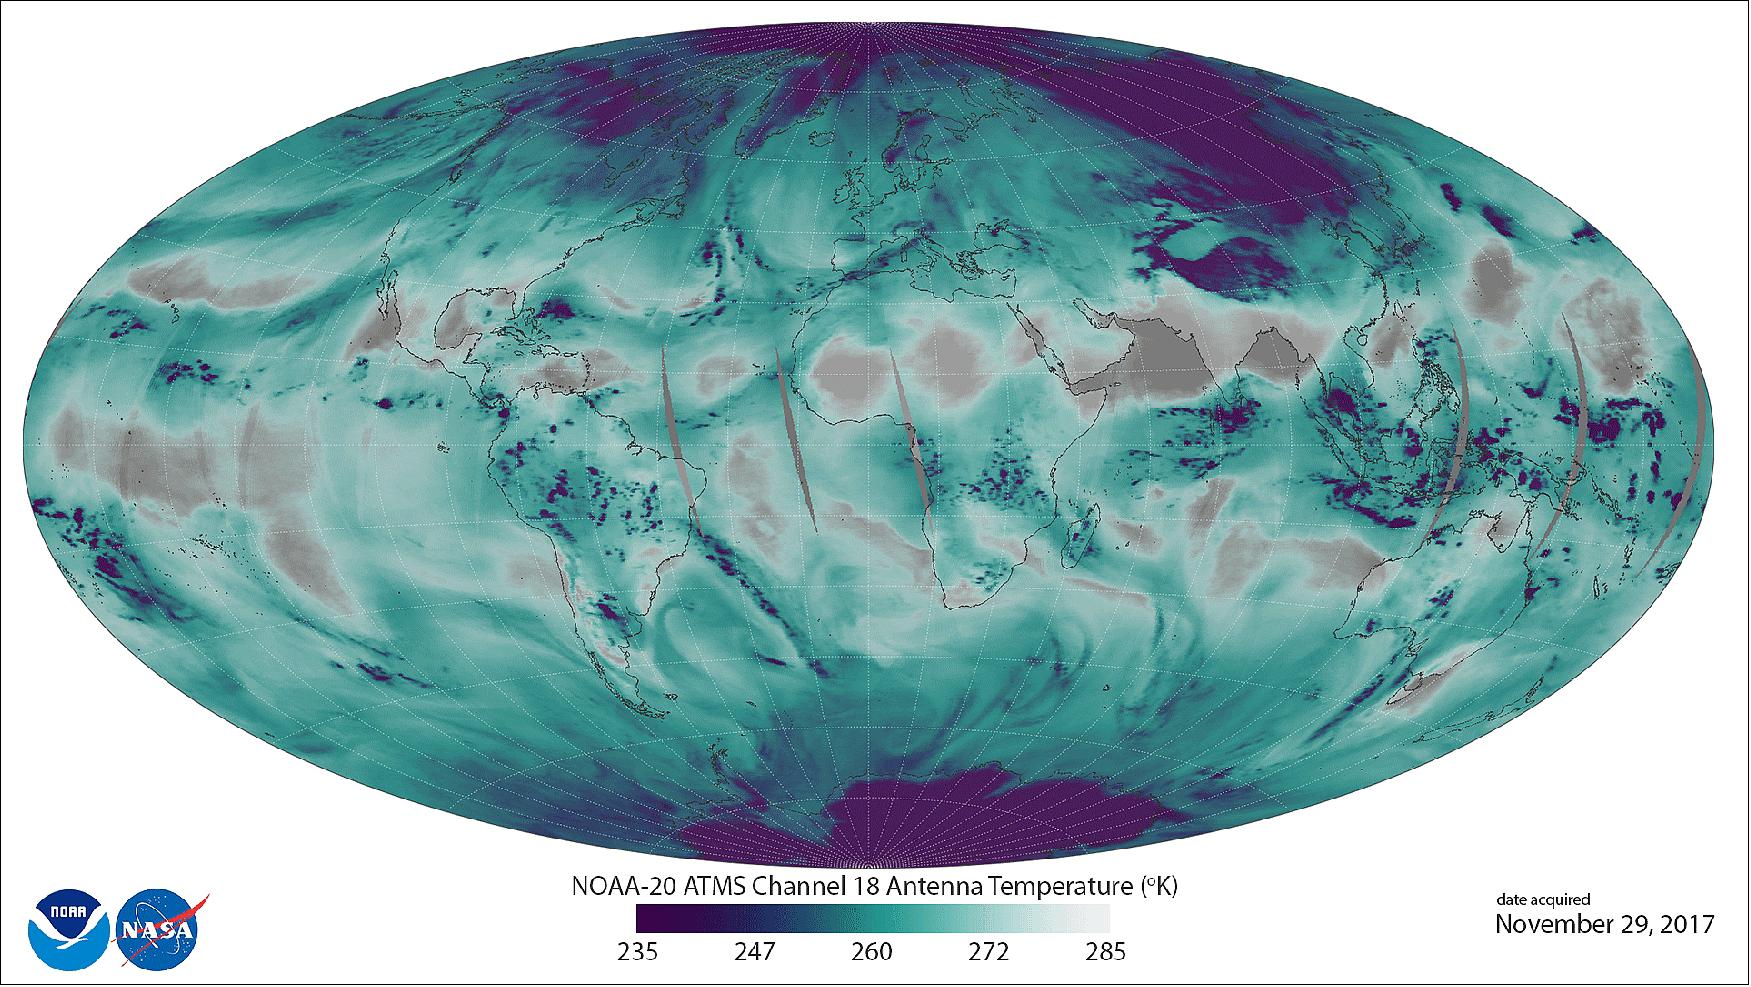 Figure 50: This image uses ATMS data to depict the location and abundance of water vapor (as associated with antenna temperatures) in the lower atmosphere, from the surface of the Earth to 5 kilometers altitude. Transparent/grey colors depict areas with less water vapor, while blue-green and purple colors represent abundant water in all phases (vapor, clouds, and precipitation) in low and middle latitudes. In the polar regions, purple depicts surface snow and ice. Water vapor distribution in space and time is a critical measurement for improving global weather forecasts. With detailed vertical information, forecasters can better identify the transport of water vapor associated with jet streams, which can fuel severe weather events (image credit: NOAA, NASA)